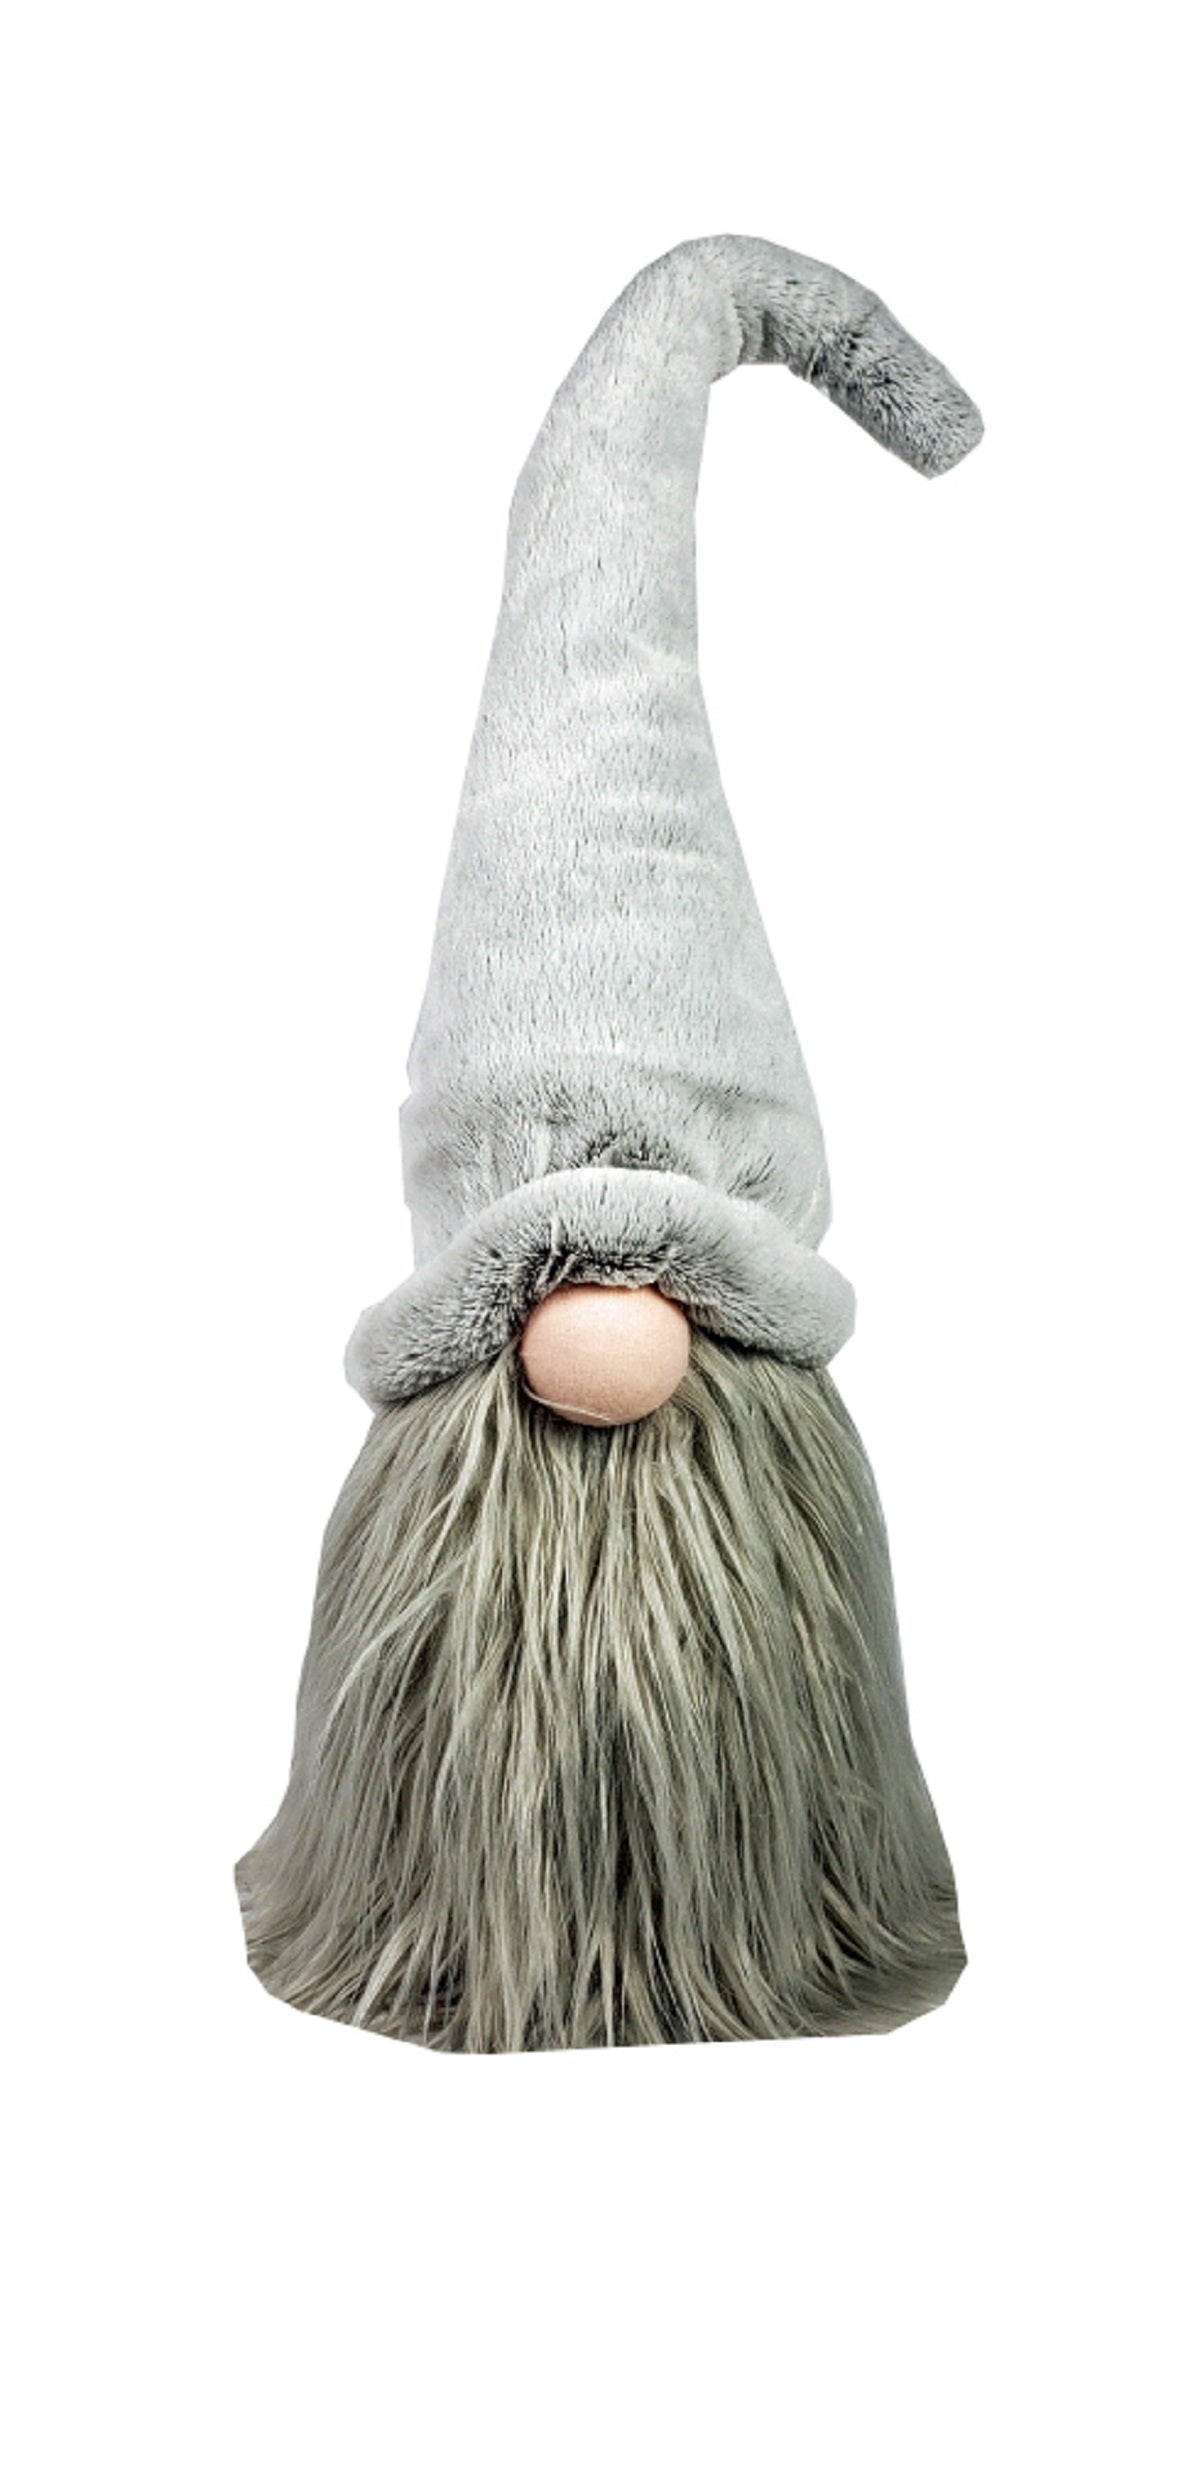 30" Groovy Grey with Pointy Hat Fabric Sitting Gnome Sculpture